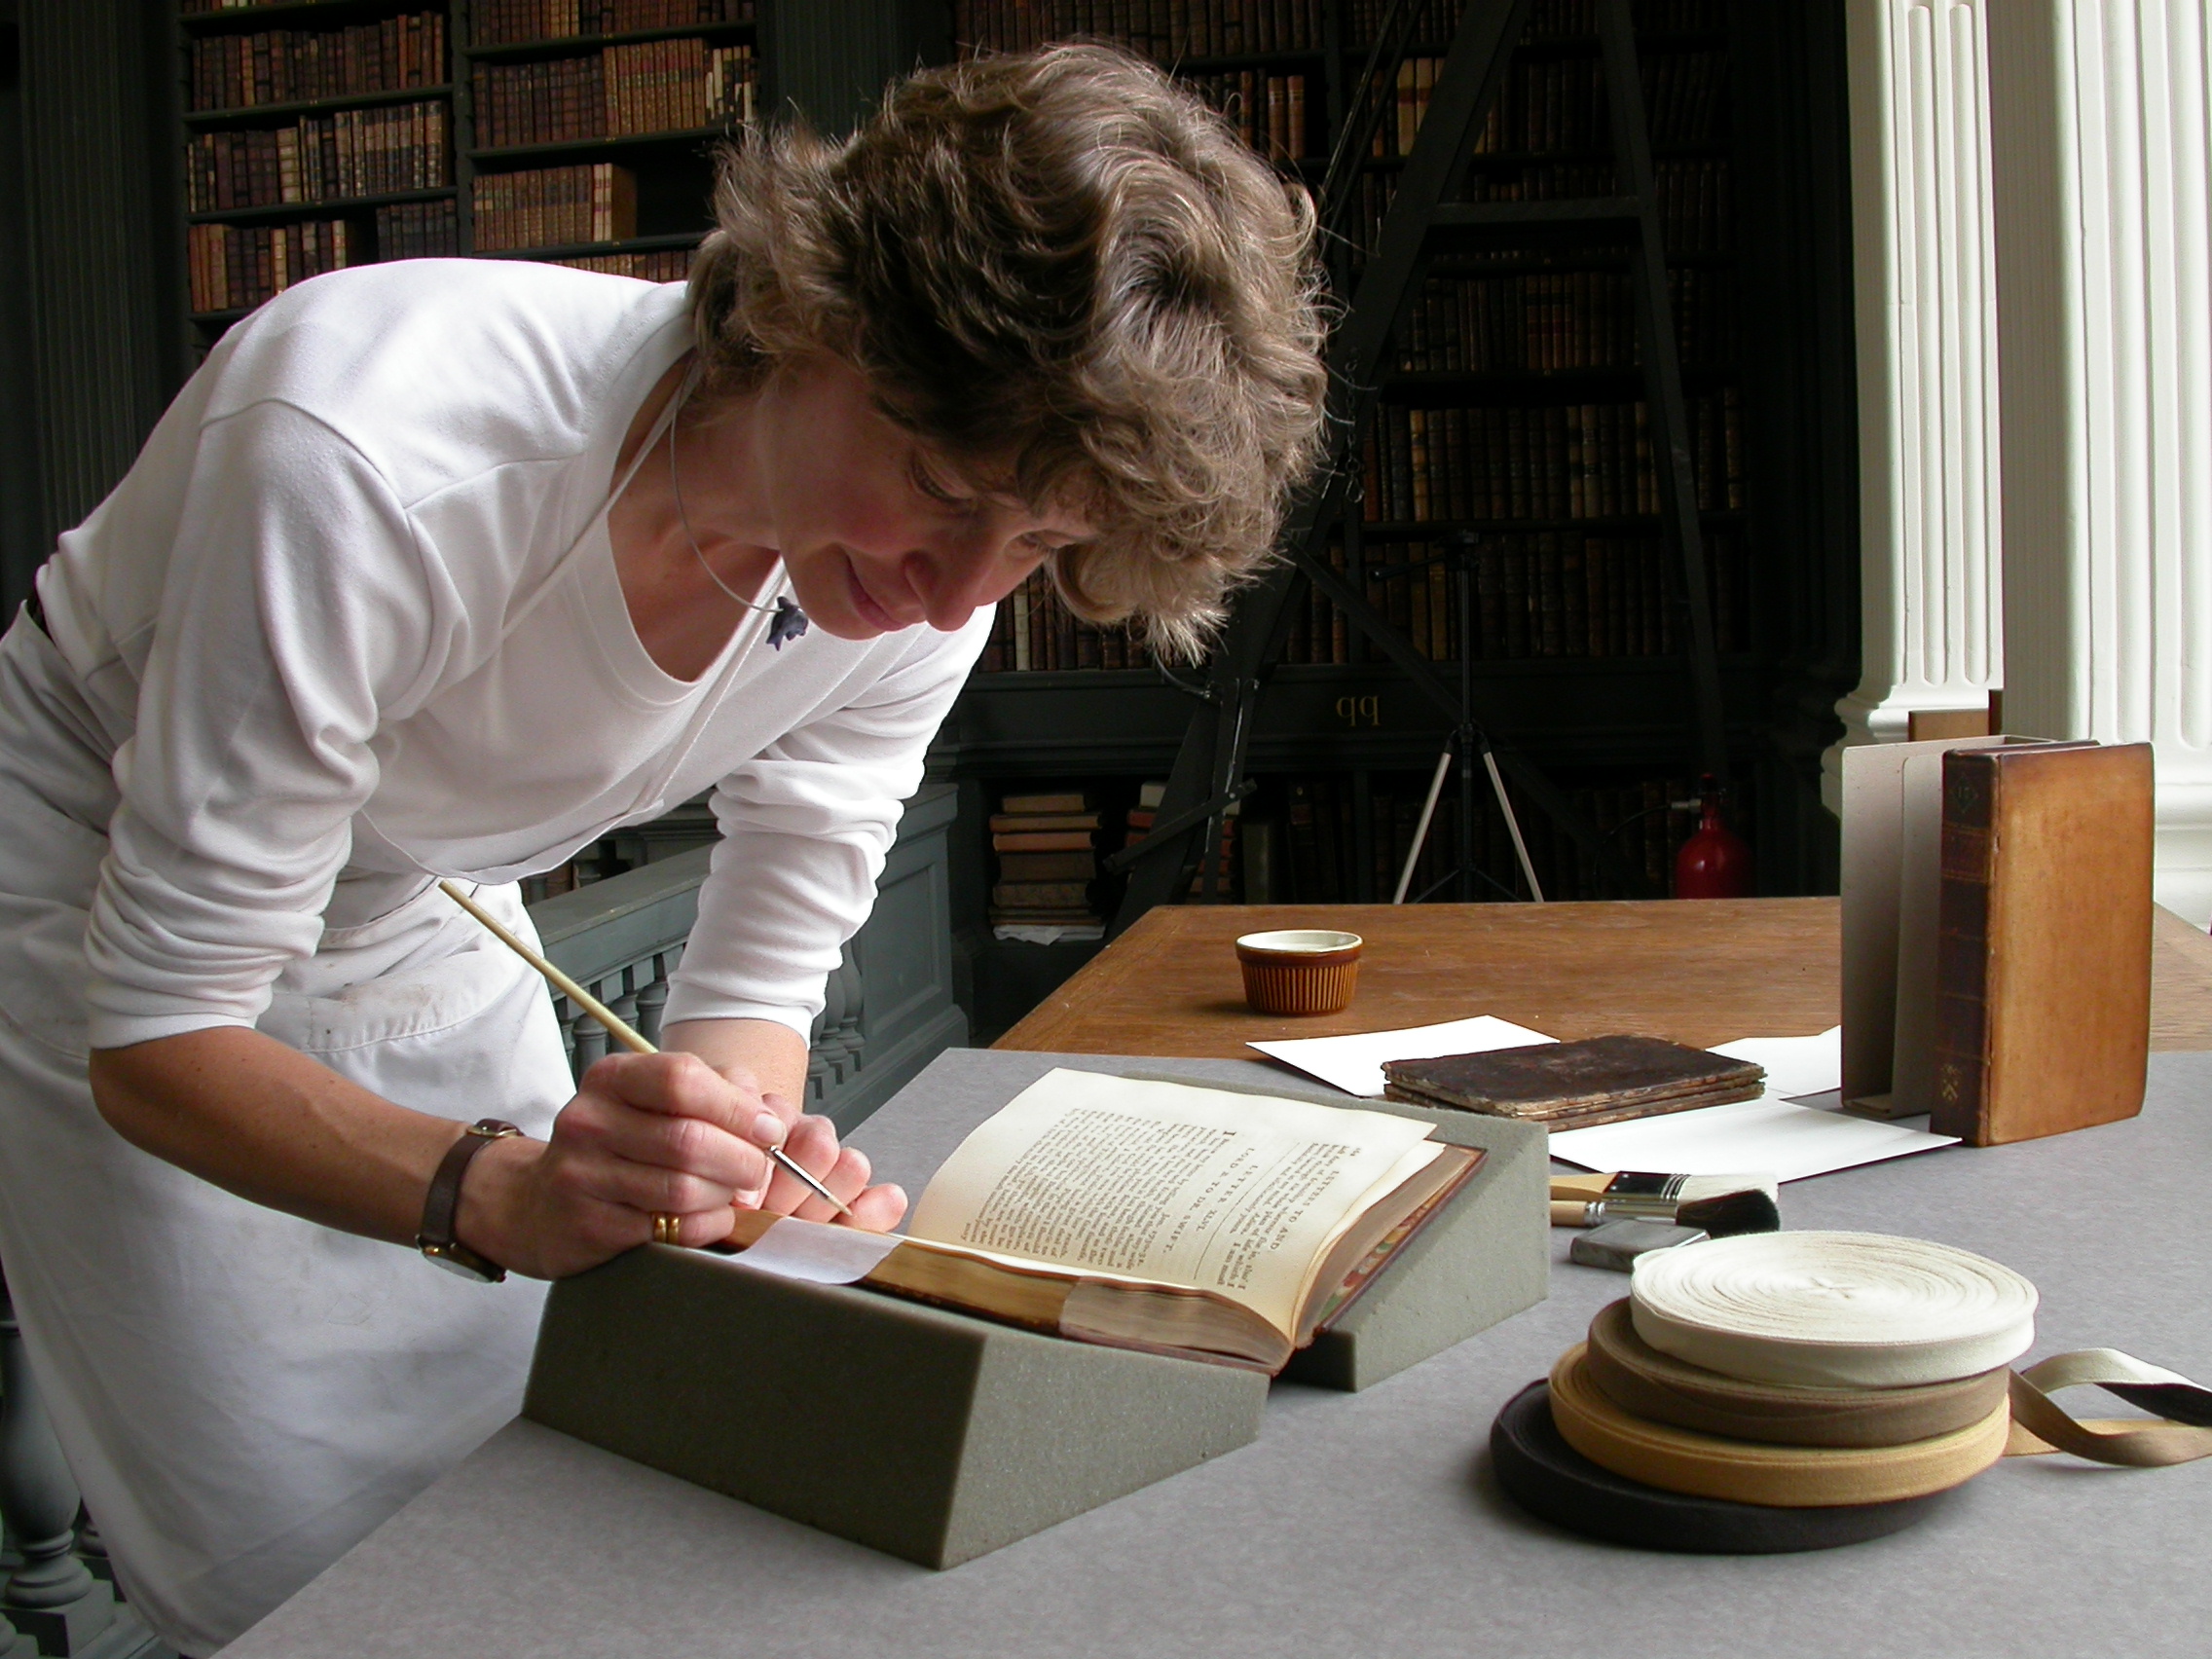 Top image: Sarah Staniforth CBE was awarded the Plowden Medal in 2015 for successfully harnessing science and new technology to make conservation more efficient and practical as well as more environmentally friendly. Image courtesy of the Royal Warrant Holders Association.  Bottom image: Caroline Bendix has restored books in both private and public collections, often in situ, for more than 30 years. Image courtesy of Caroline Bendix.